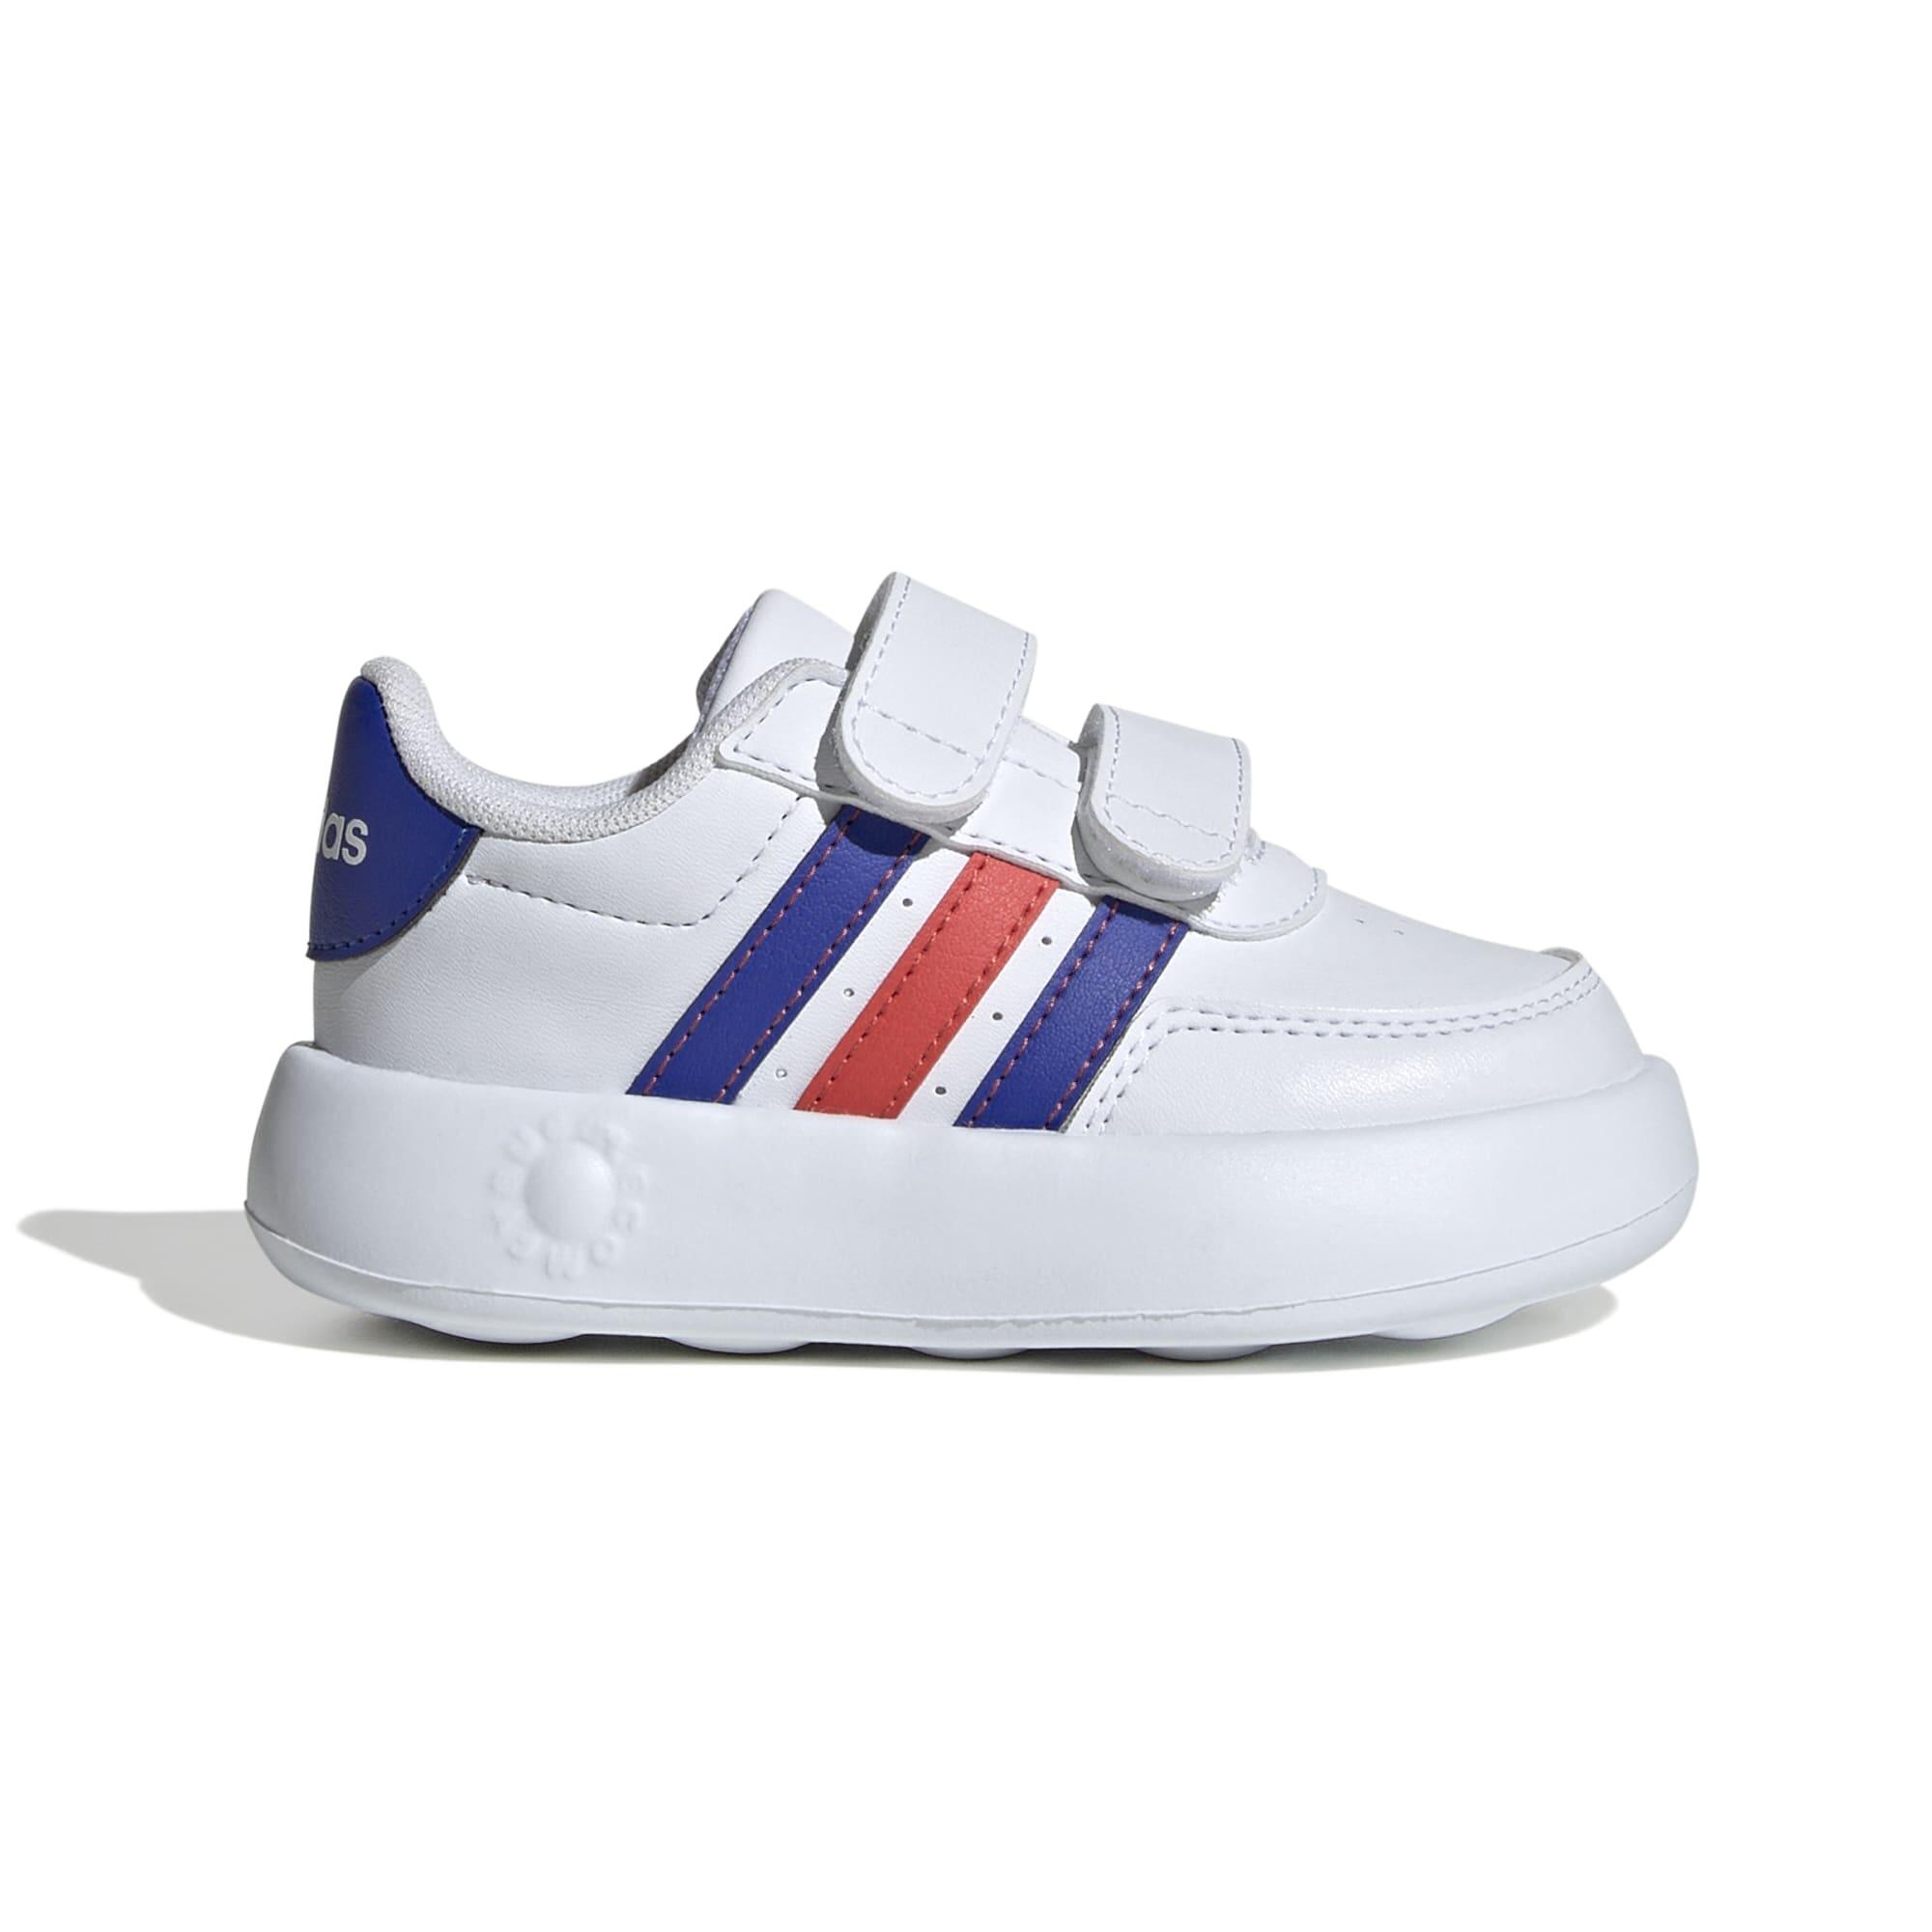 Adidas Kids' Shoes Breaknet - White / Blue Red